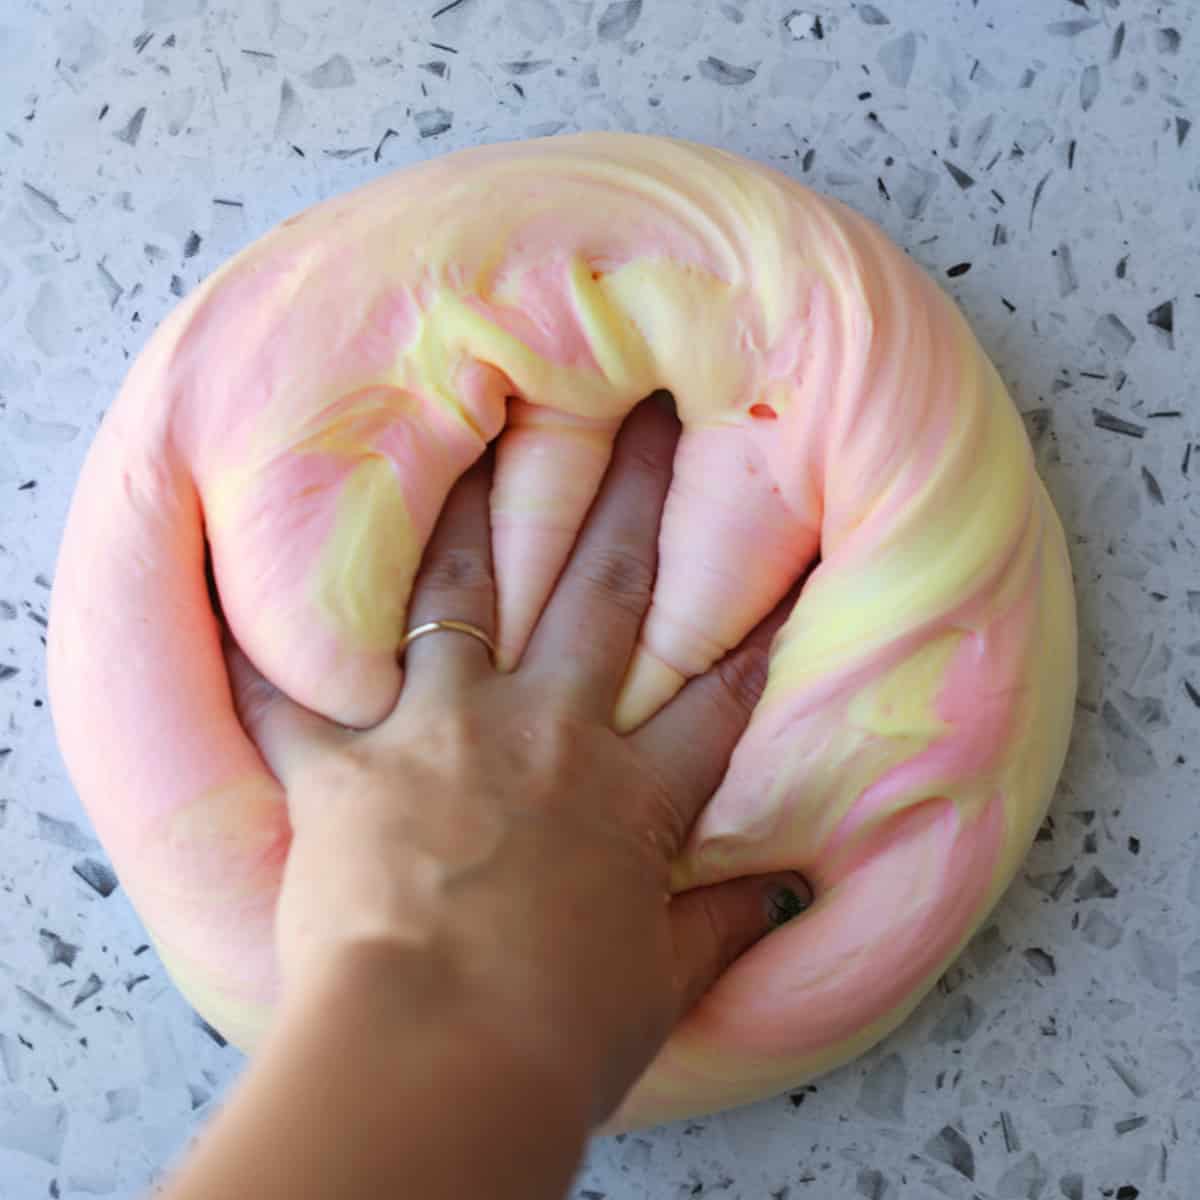 fluffy slime being pressed with a hand